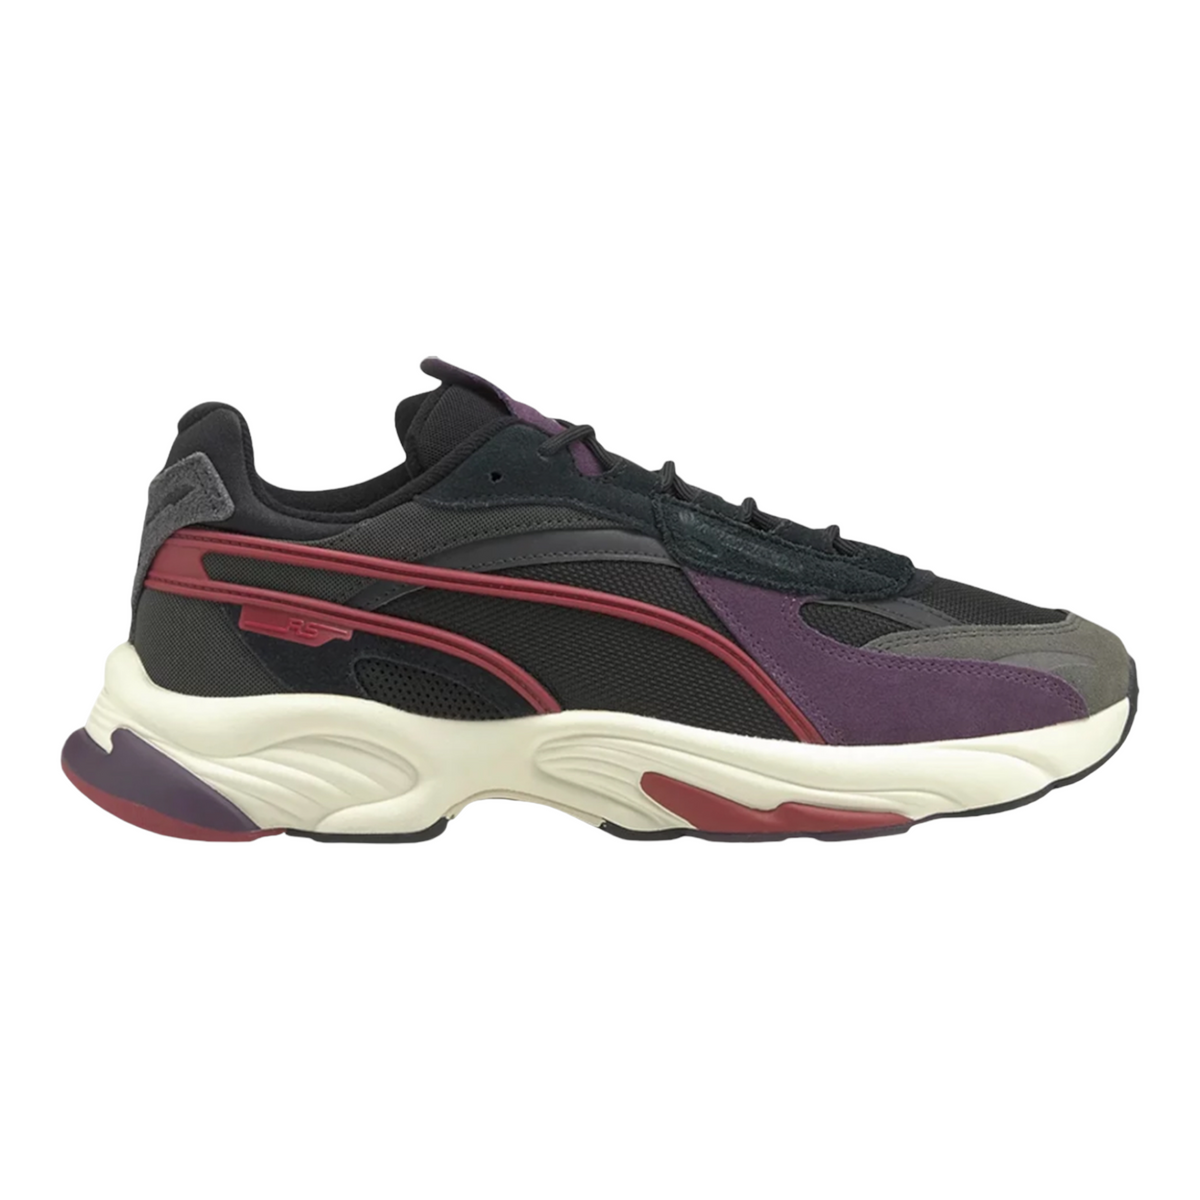 Puma Select Men's RS-Connect Drip Sneakers